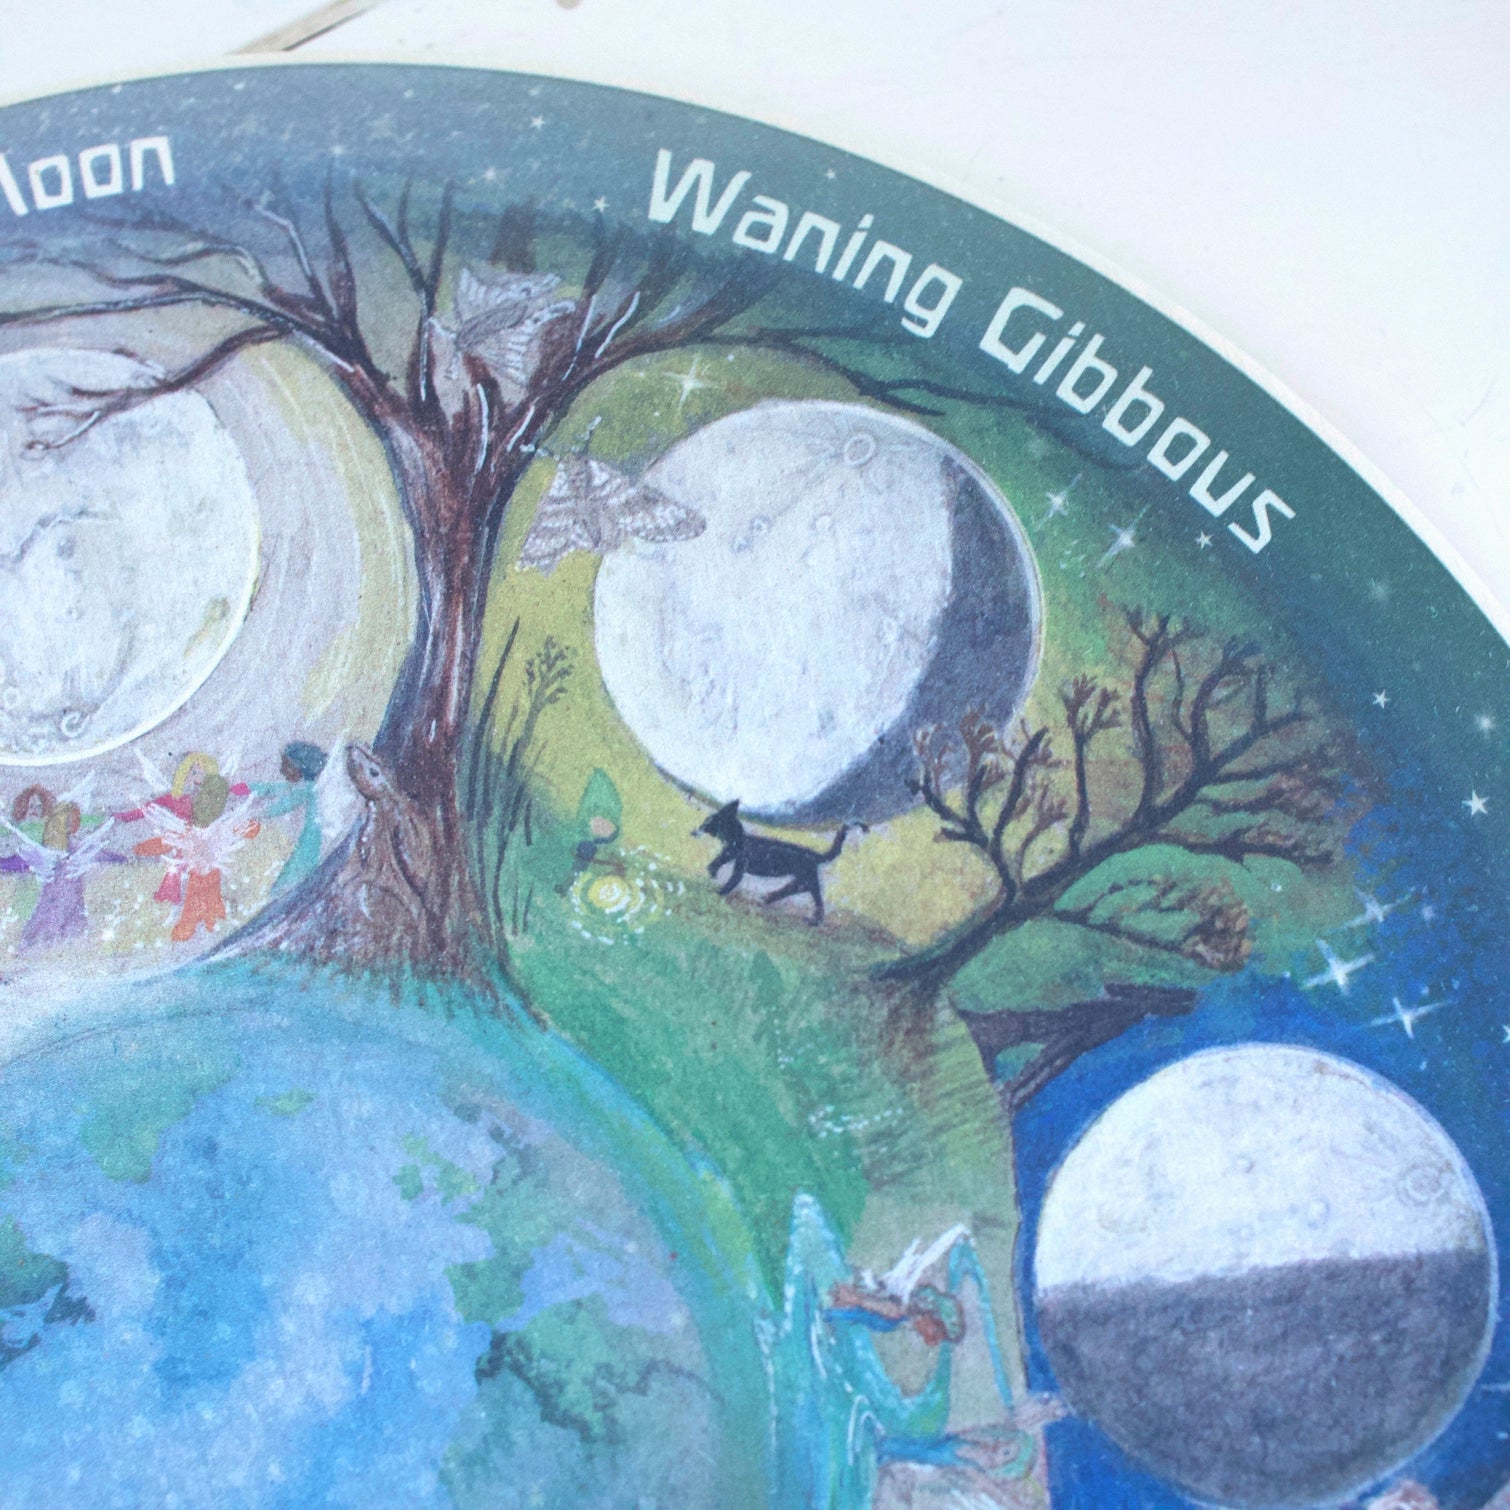 Phases of the Moon Wheel by the Wilded Family - Alder & Alouette